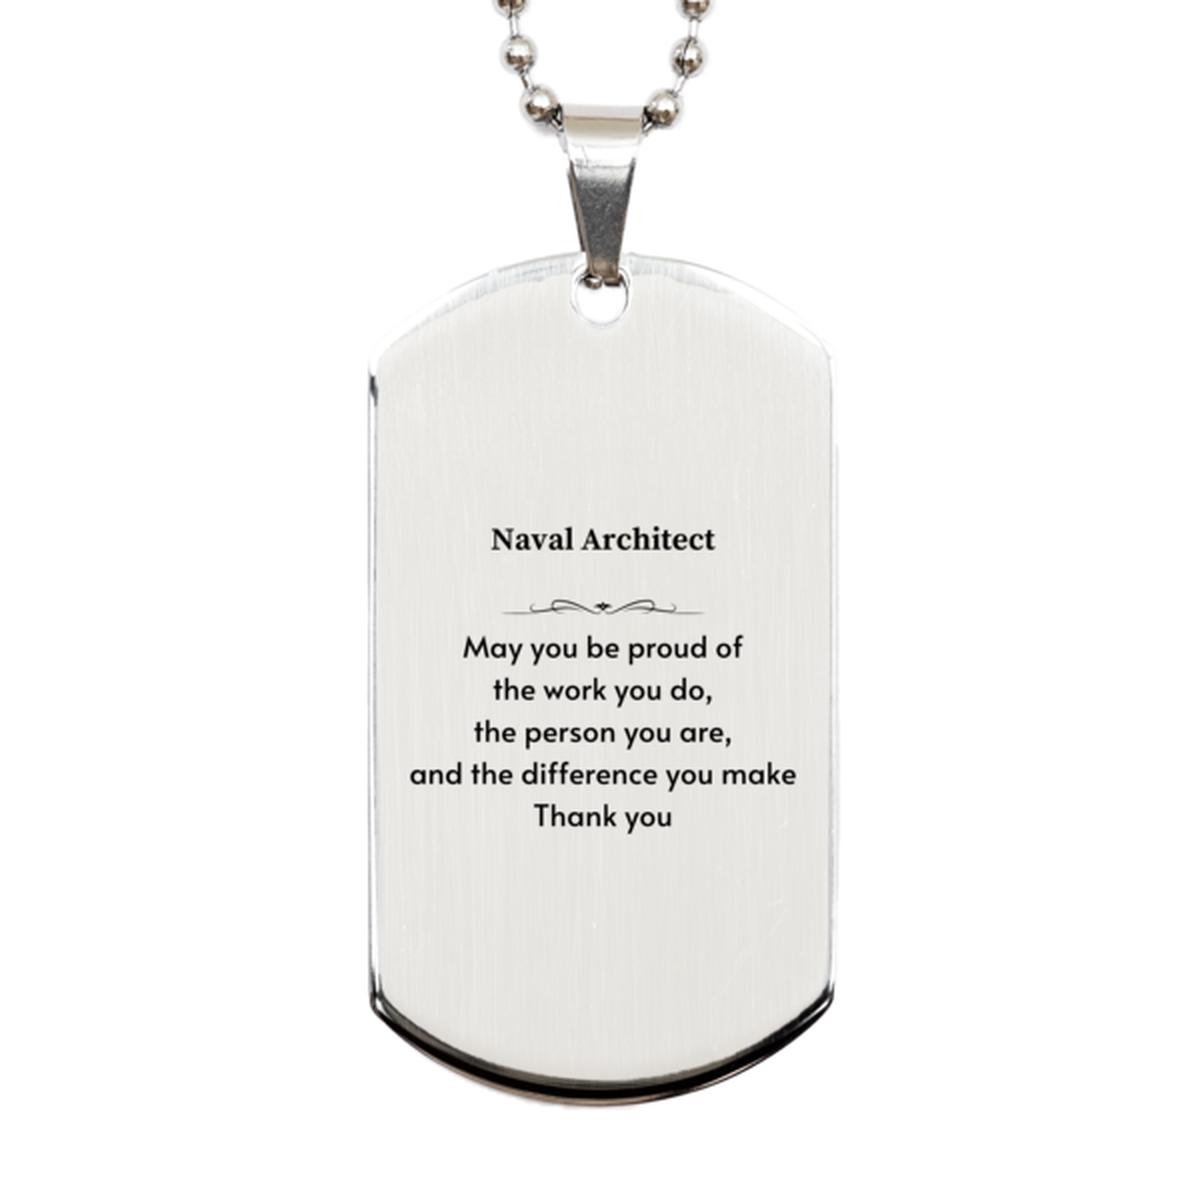 Heartwarming Silver Dog Tag Retirement Coworkers Gifts for Naval Architect, Naval Architect May You be proud of the work you do, the person you are Gifts for Boss Men Women Friends